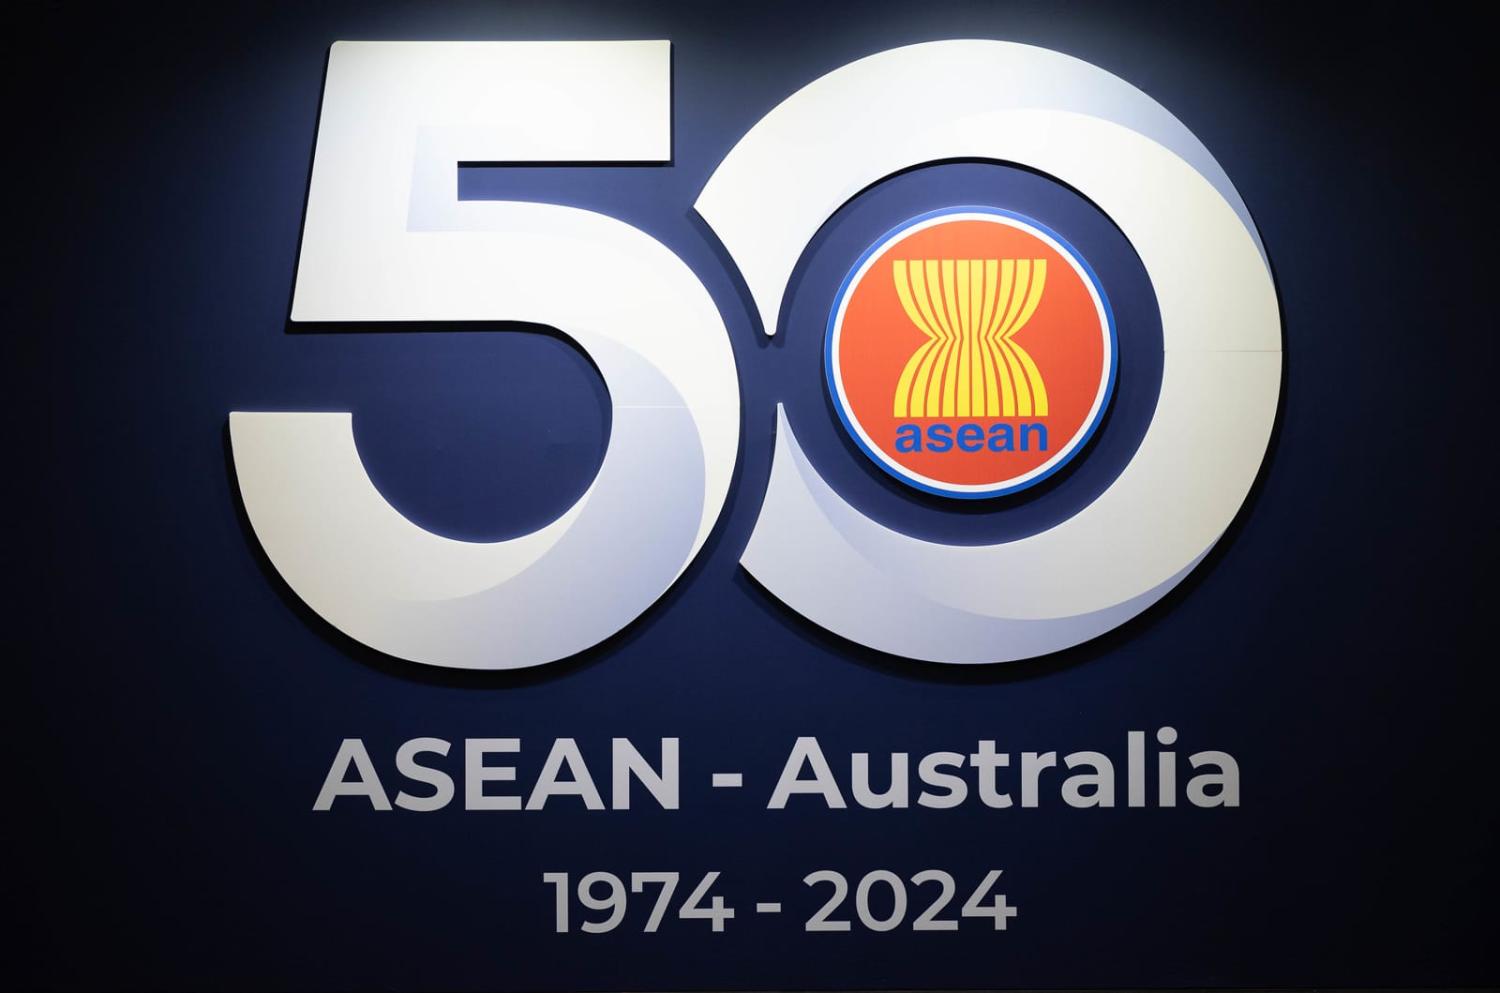 Melbourne is host for the three-day summit marking 50 years of Australia's formal dialogue relationship with ASEAN (John Pryke/ASEAN-Australia Summit))